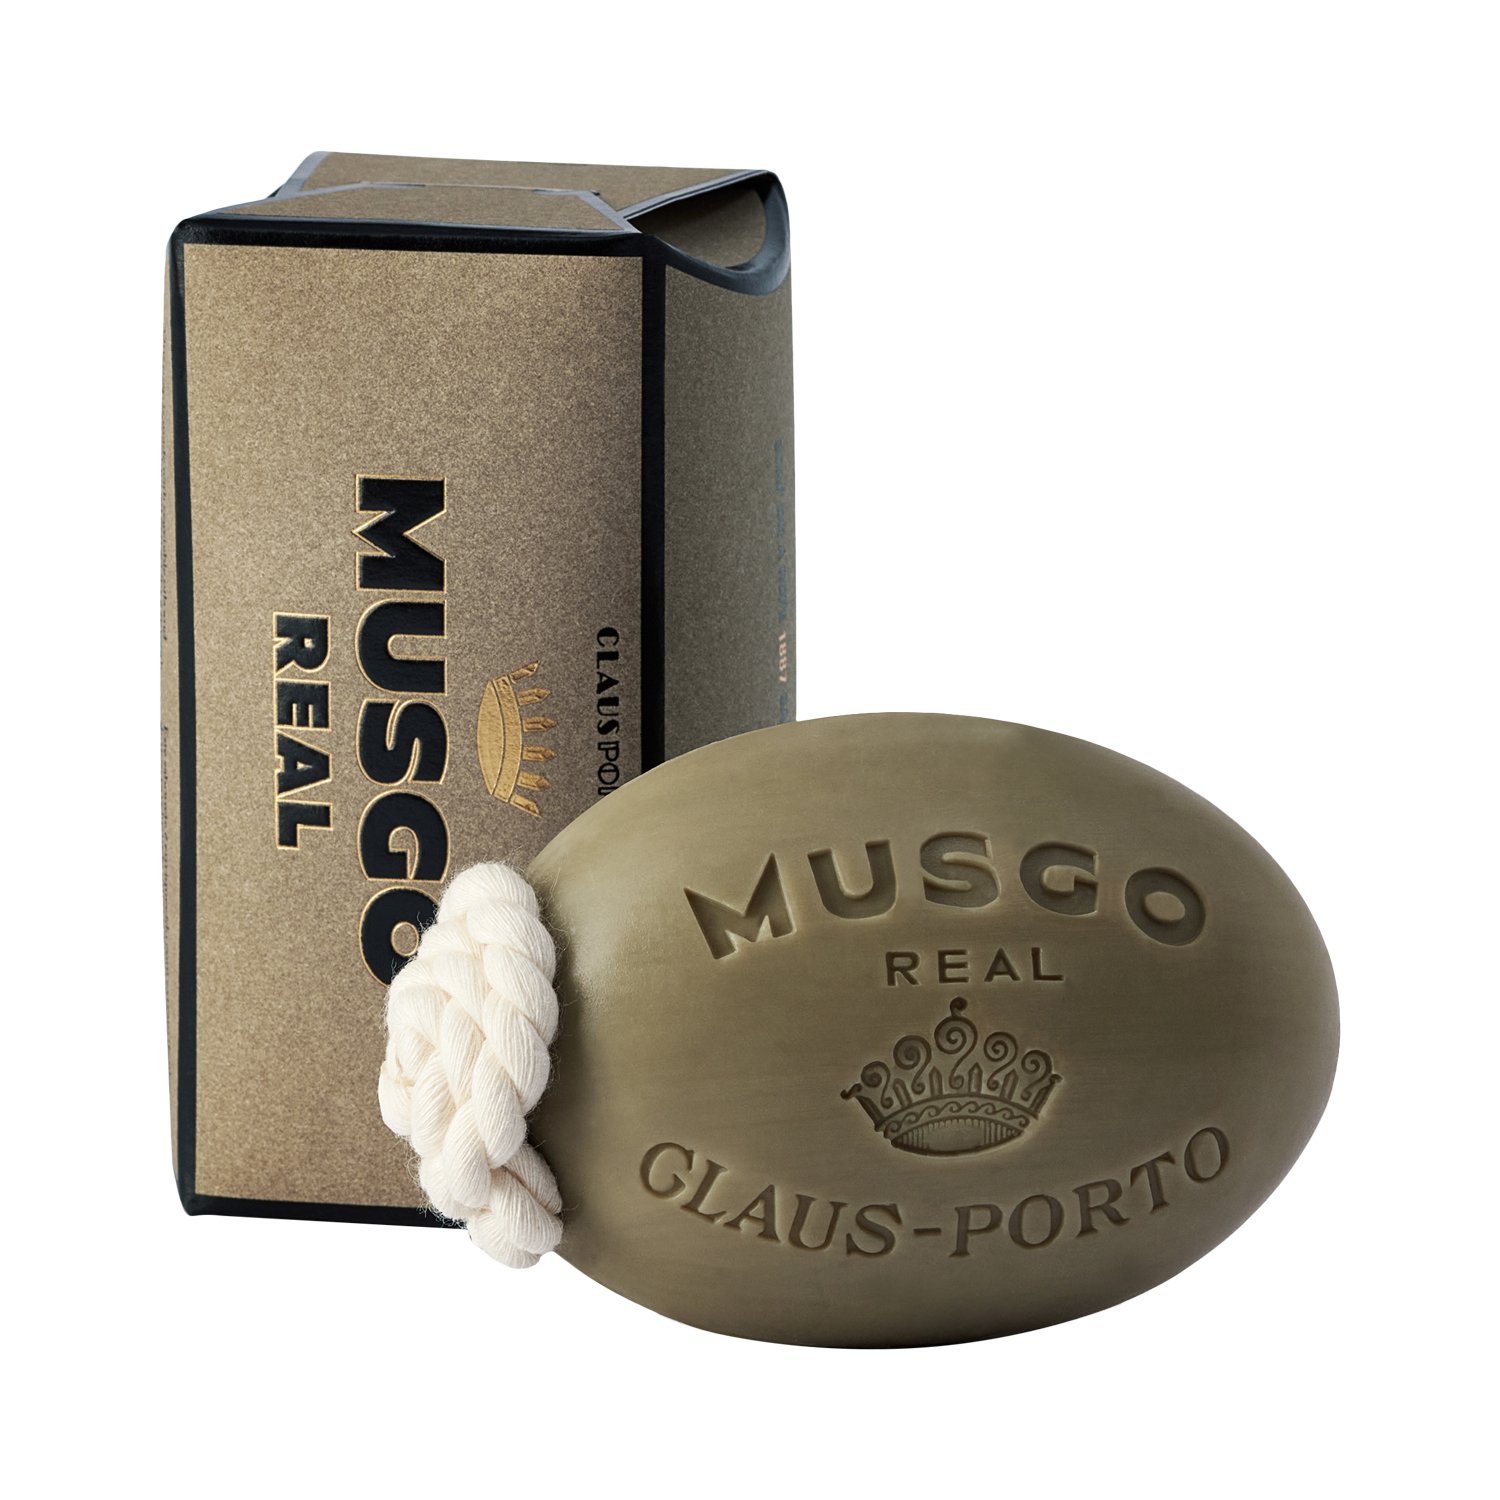 Musgo Real - Soap on a Rope - 1887 - Körperseife